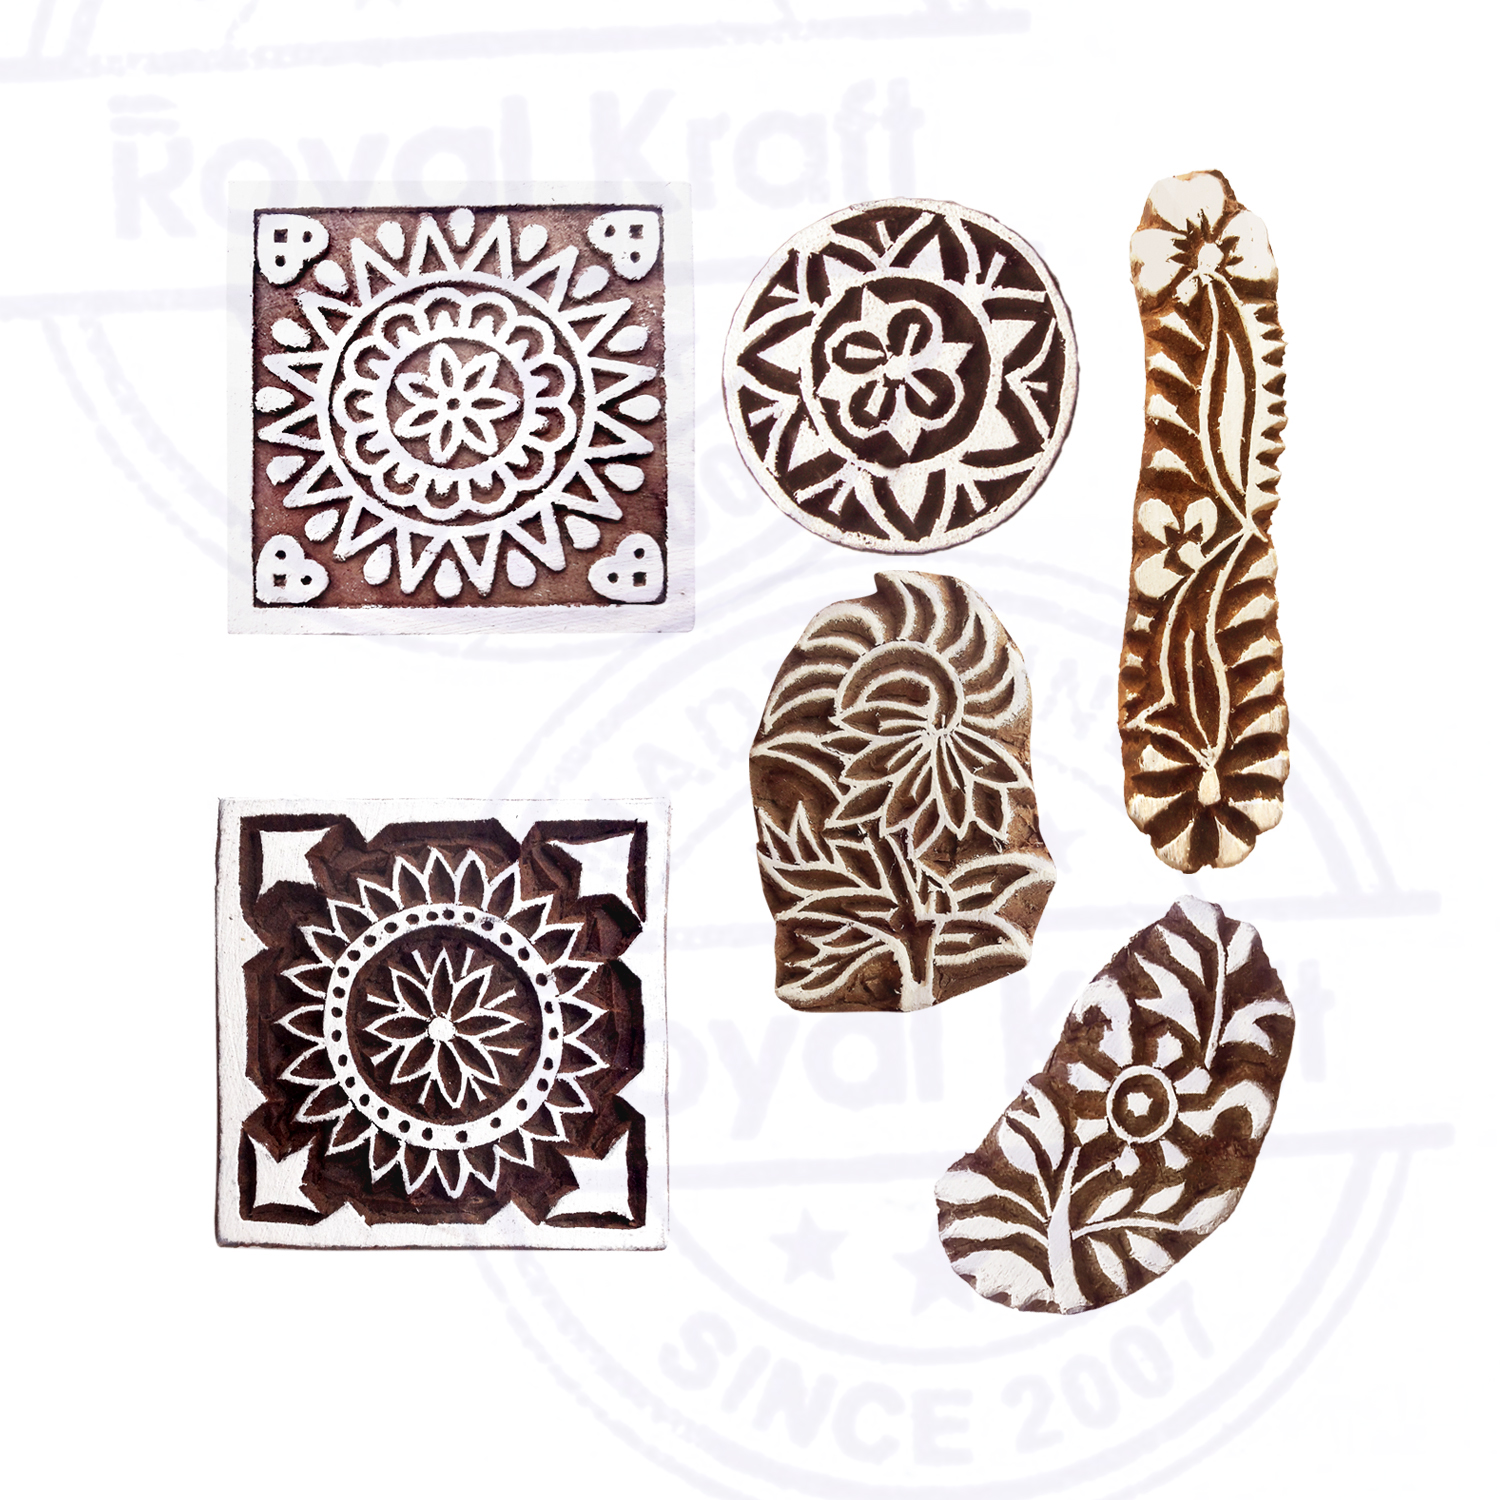 Assorted Printing Blocks 3 inches